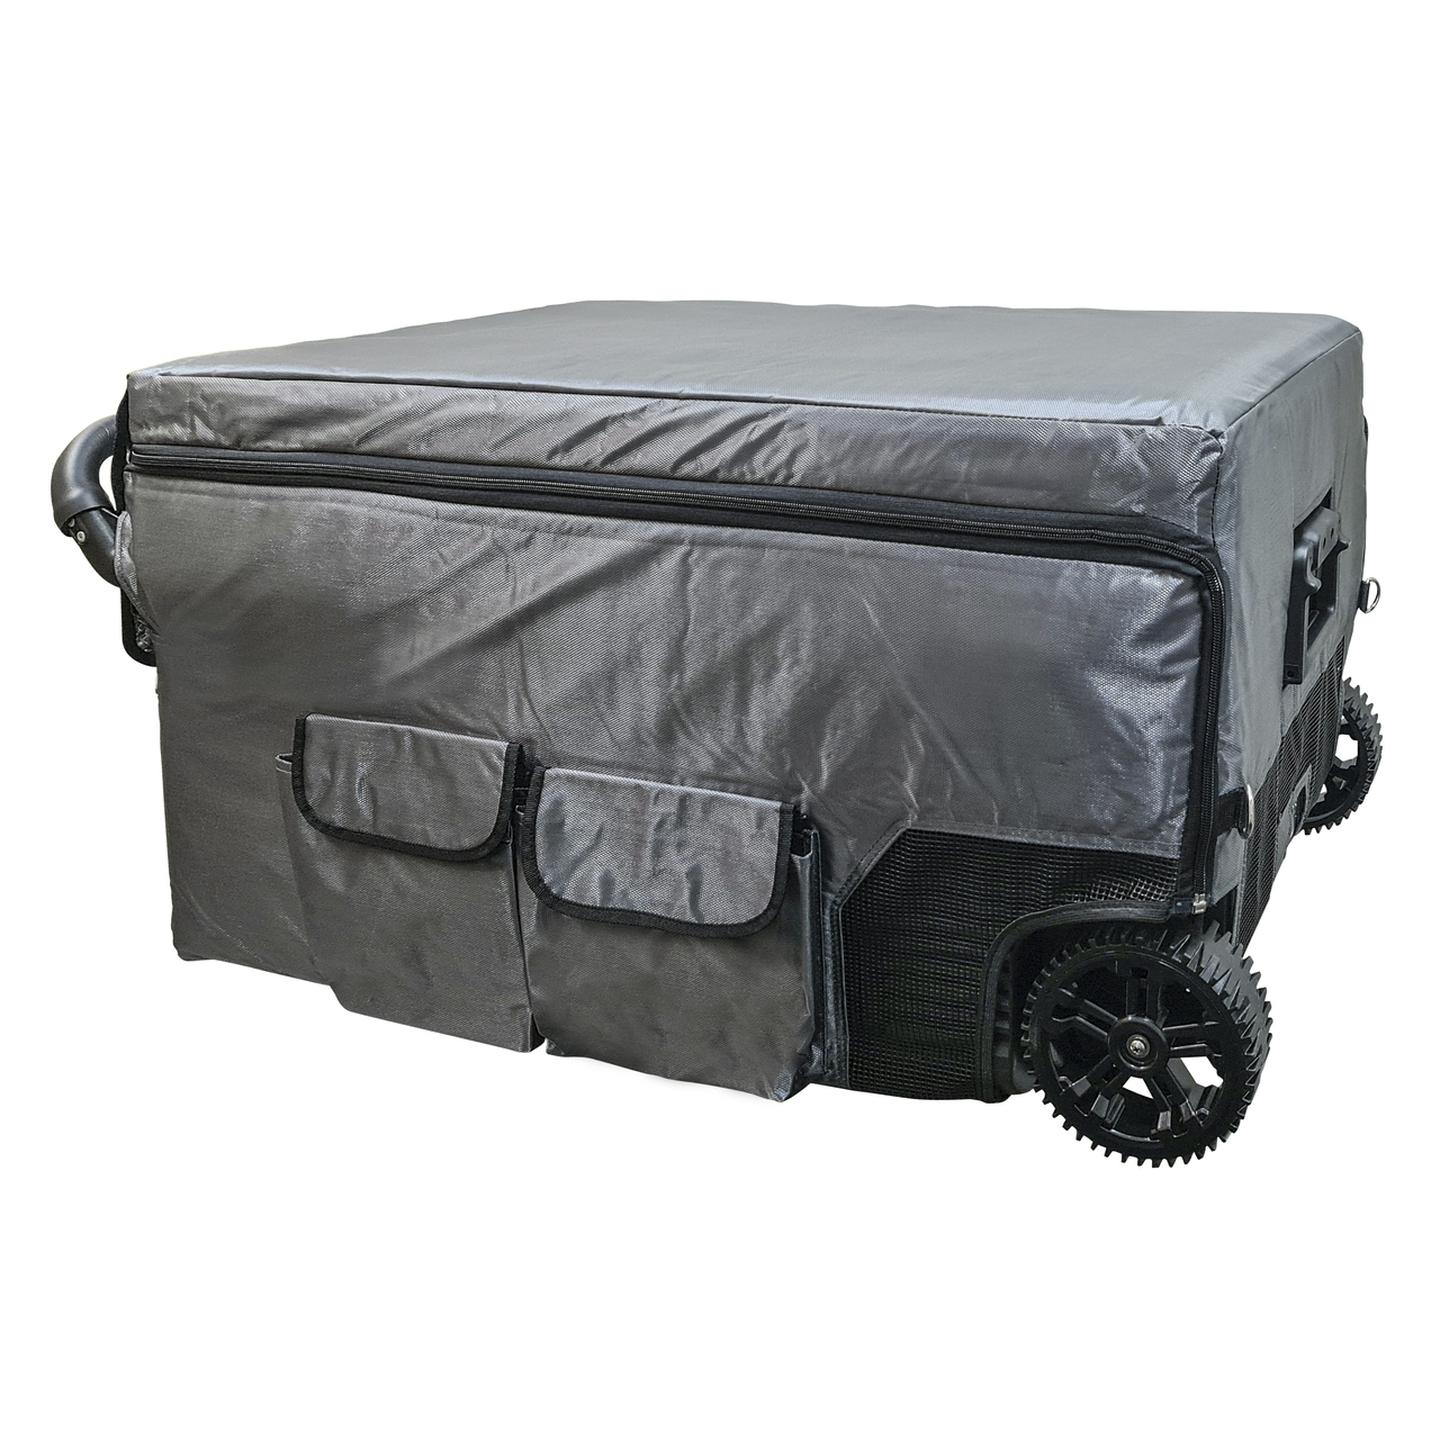 Grey Insulated Cover for 95L Brass Monkey Portable Fridge/Freezer with Wheels